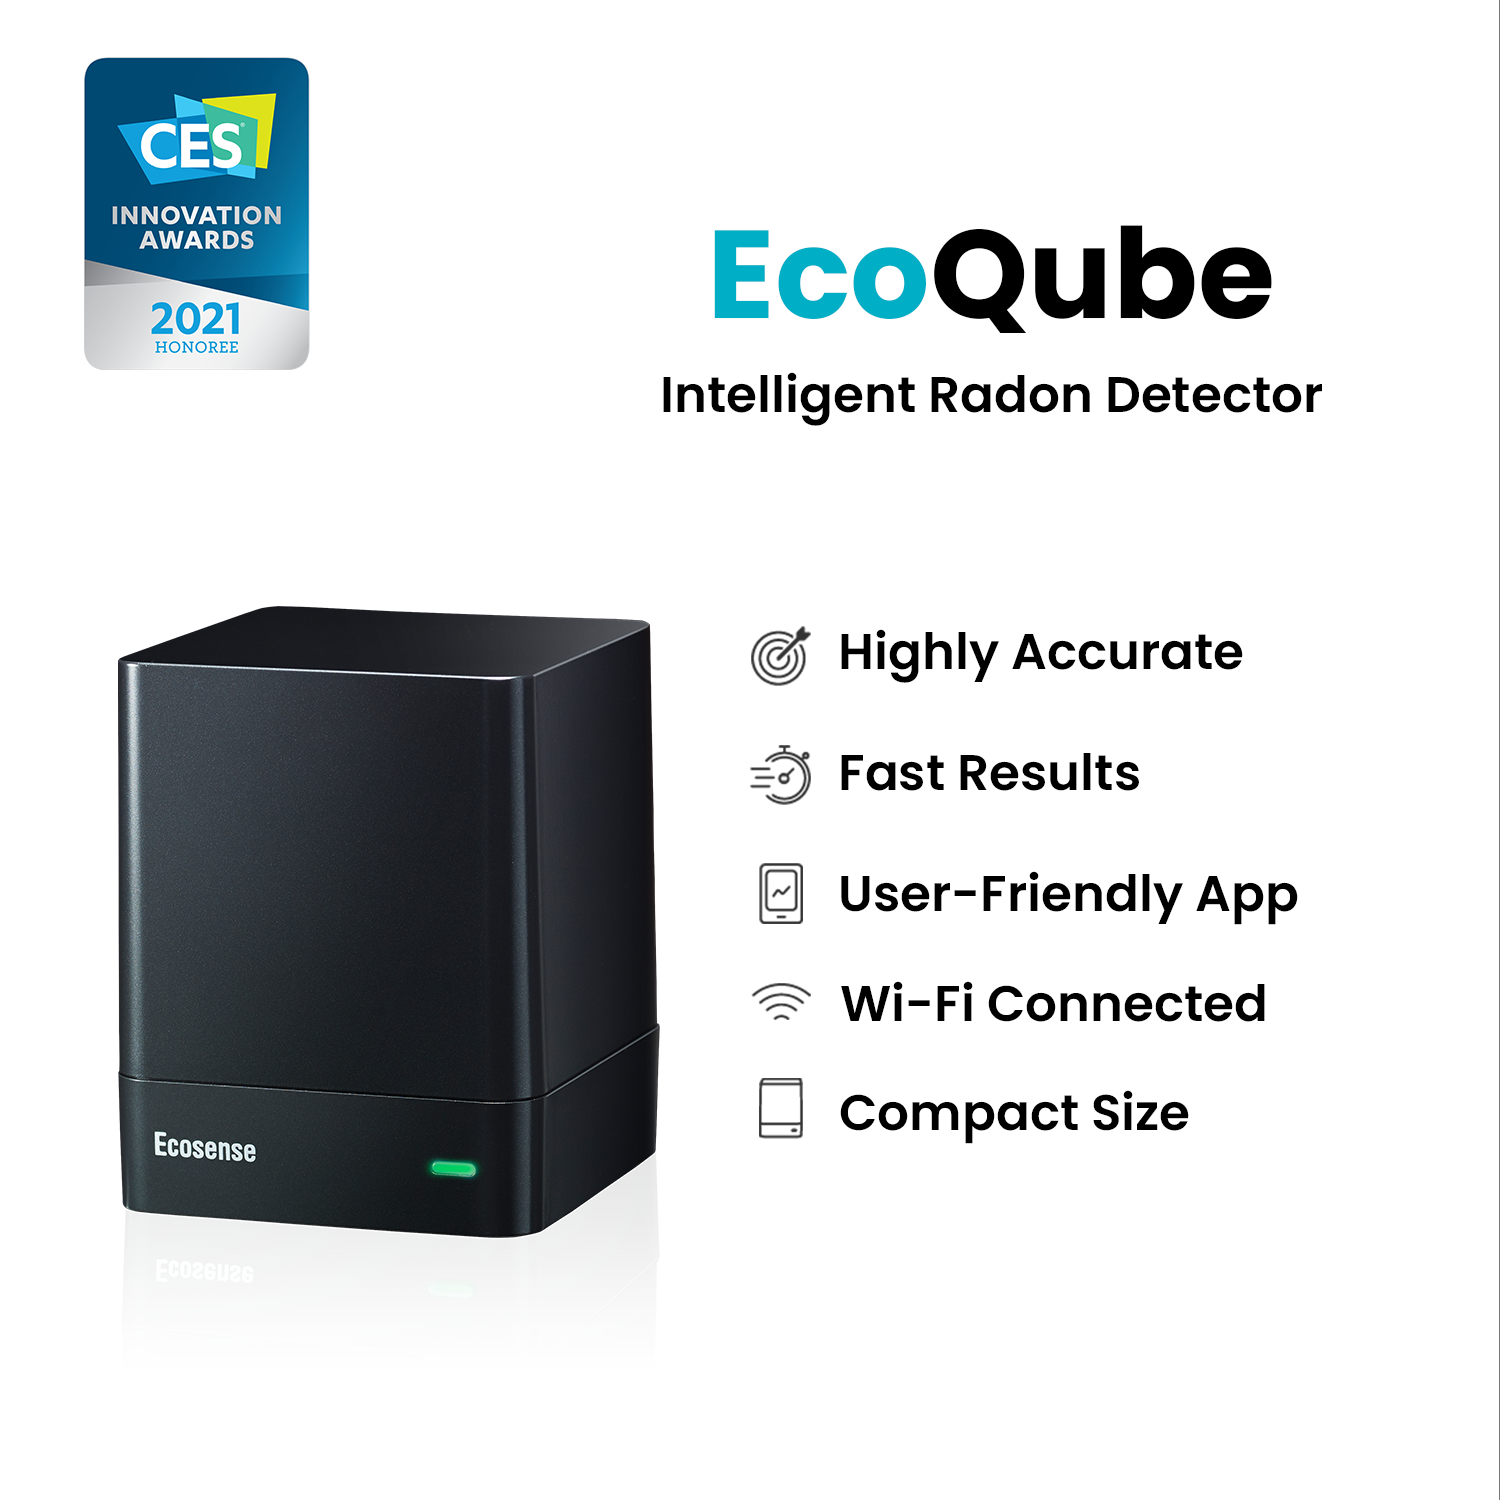 EcoQube Shipments Dramatically Increase After Radon Detection and Monitoring Device is Included in TIME’s Best Inventions List of 2021